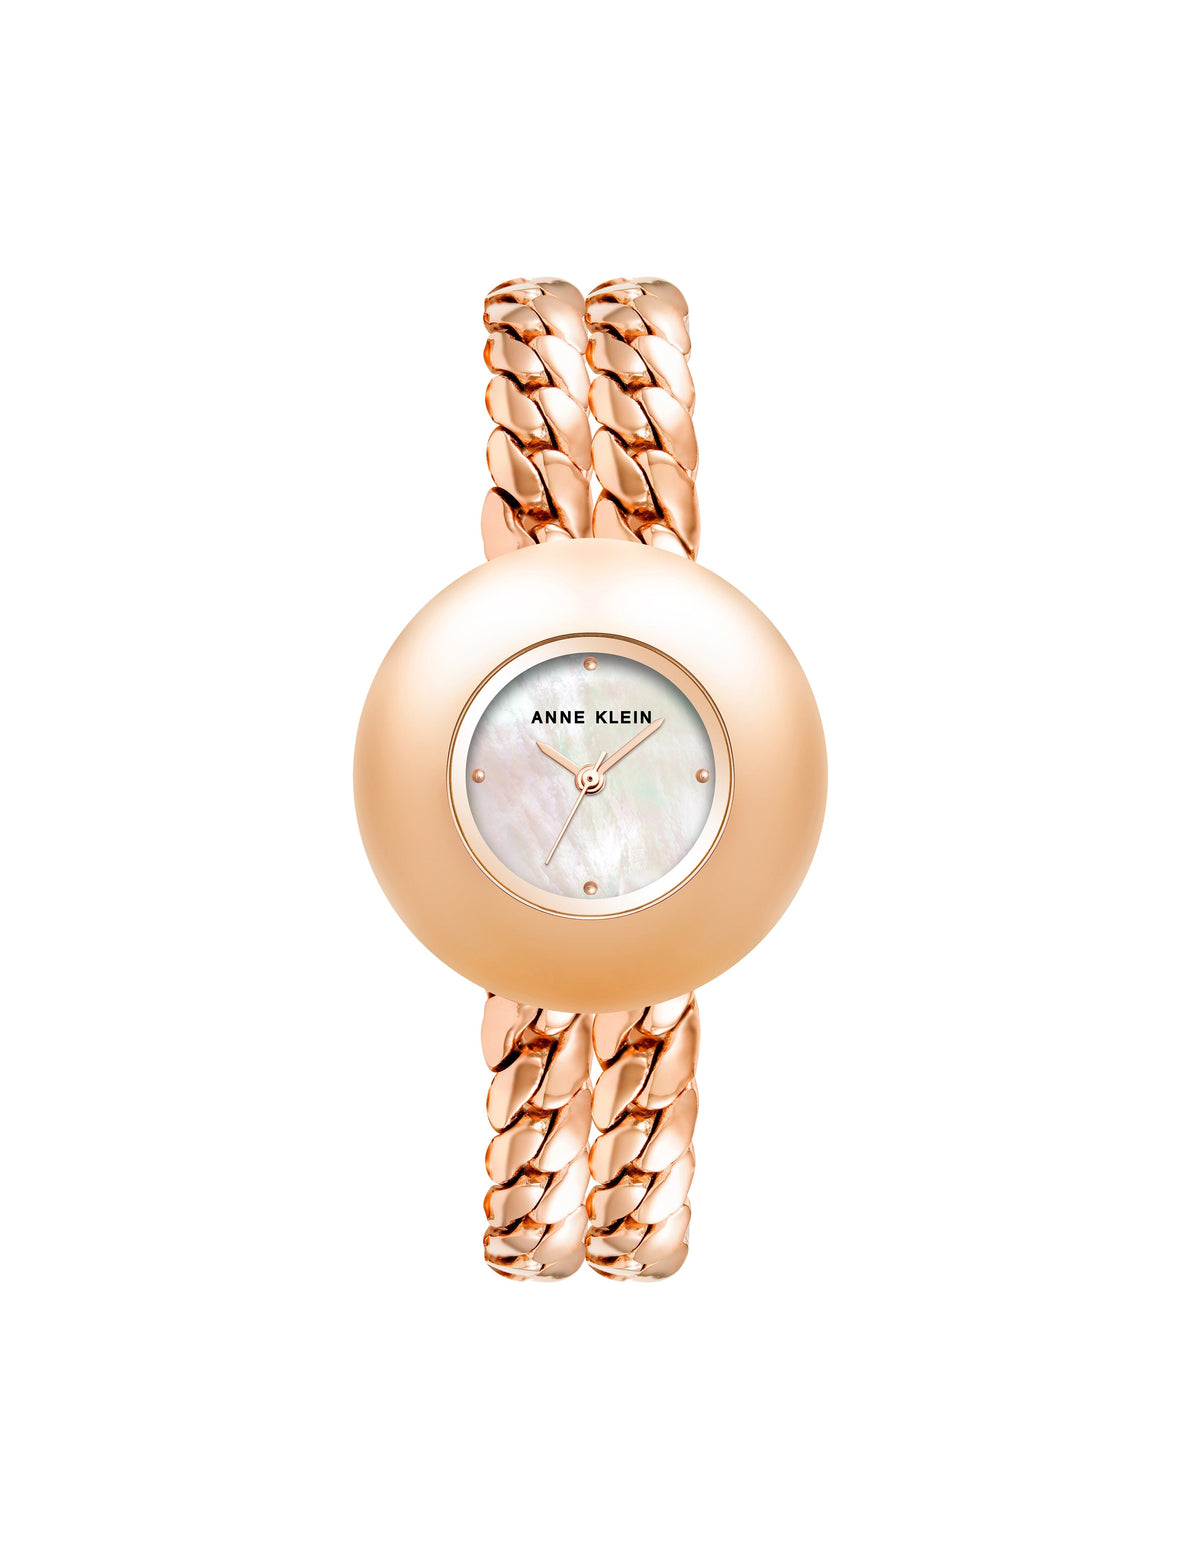 Anne Klein Rose Gold-Tone Double Chain Bracelet Watch - Clearance